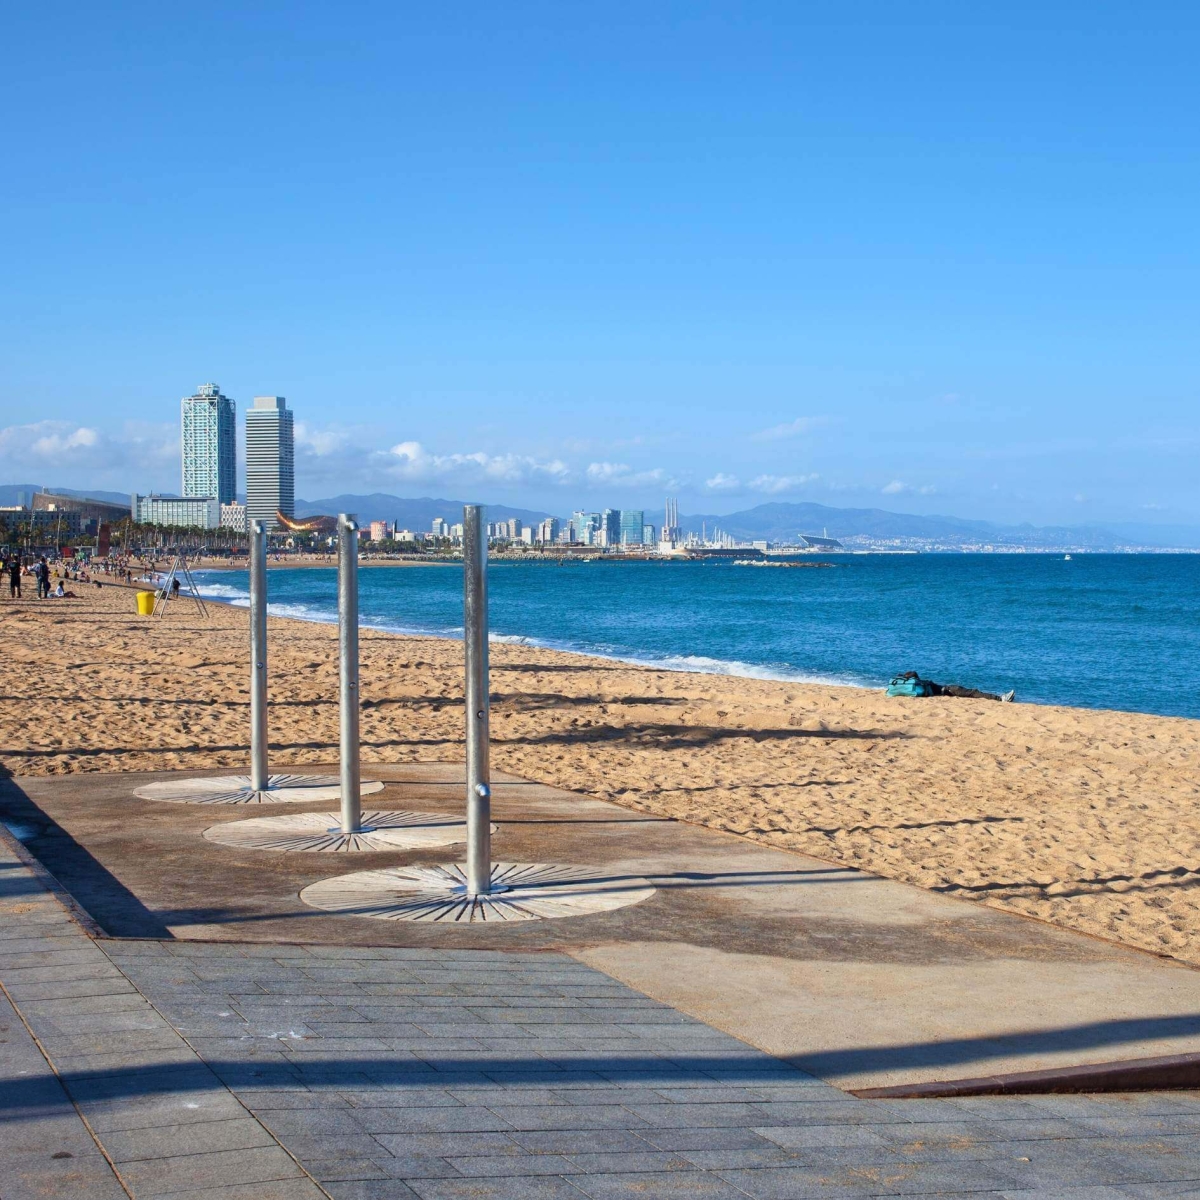 Barceloneta beach by the Mediterranean Sea with showers on a sunny day in Barcelona, Catalonia